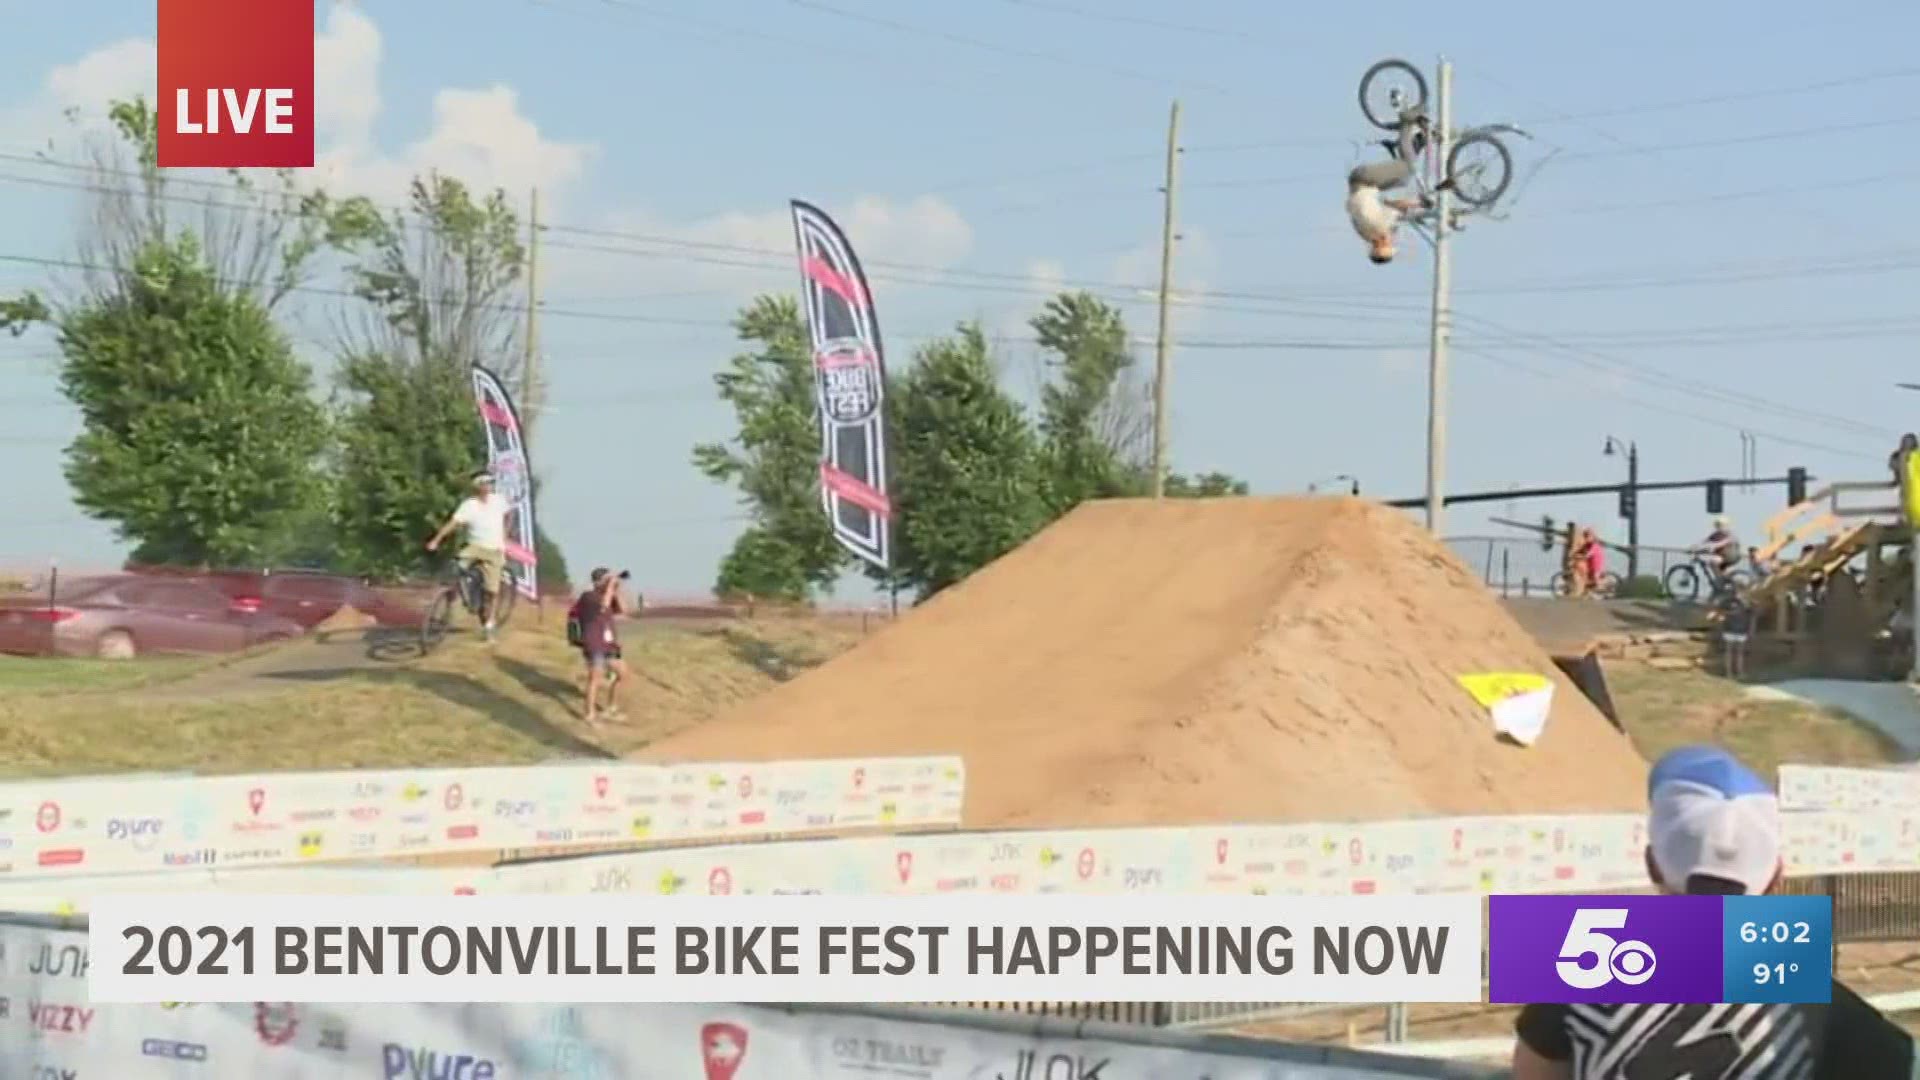 The free festival offers free bike demos, world-class action and access to some of the best trails Bentonville has to offer.